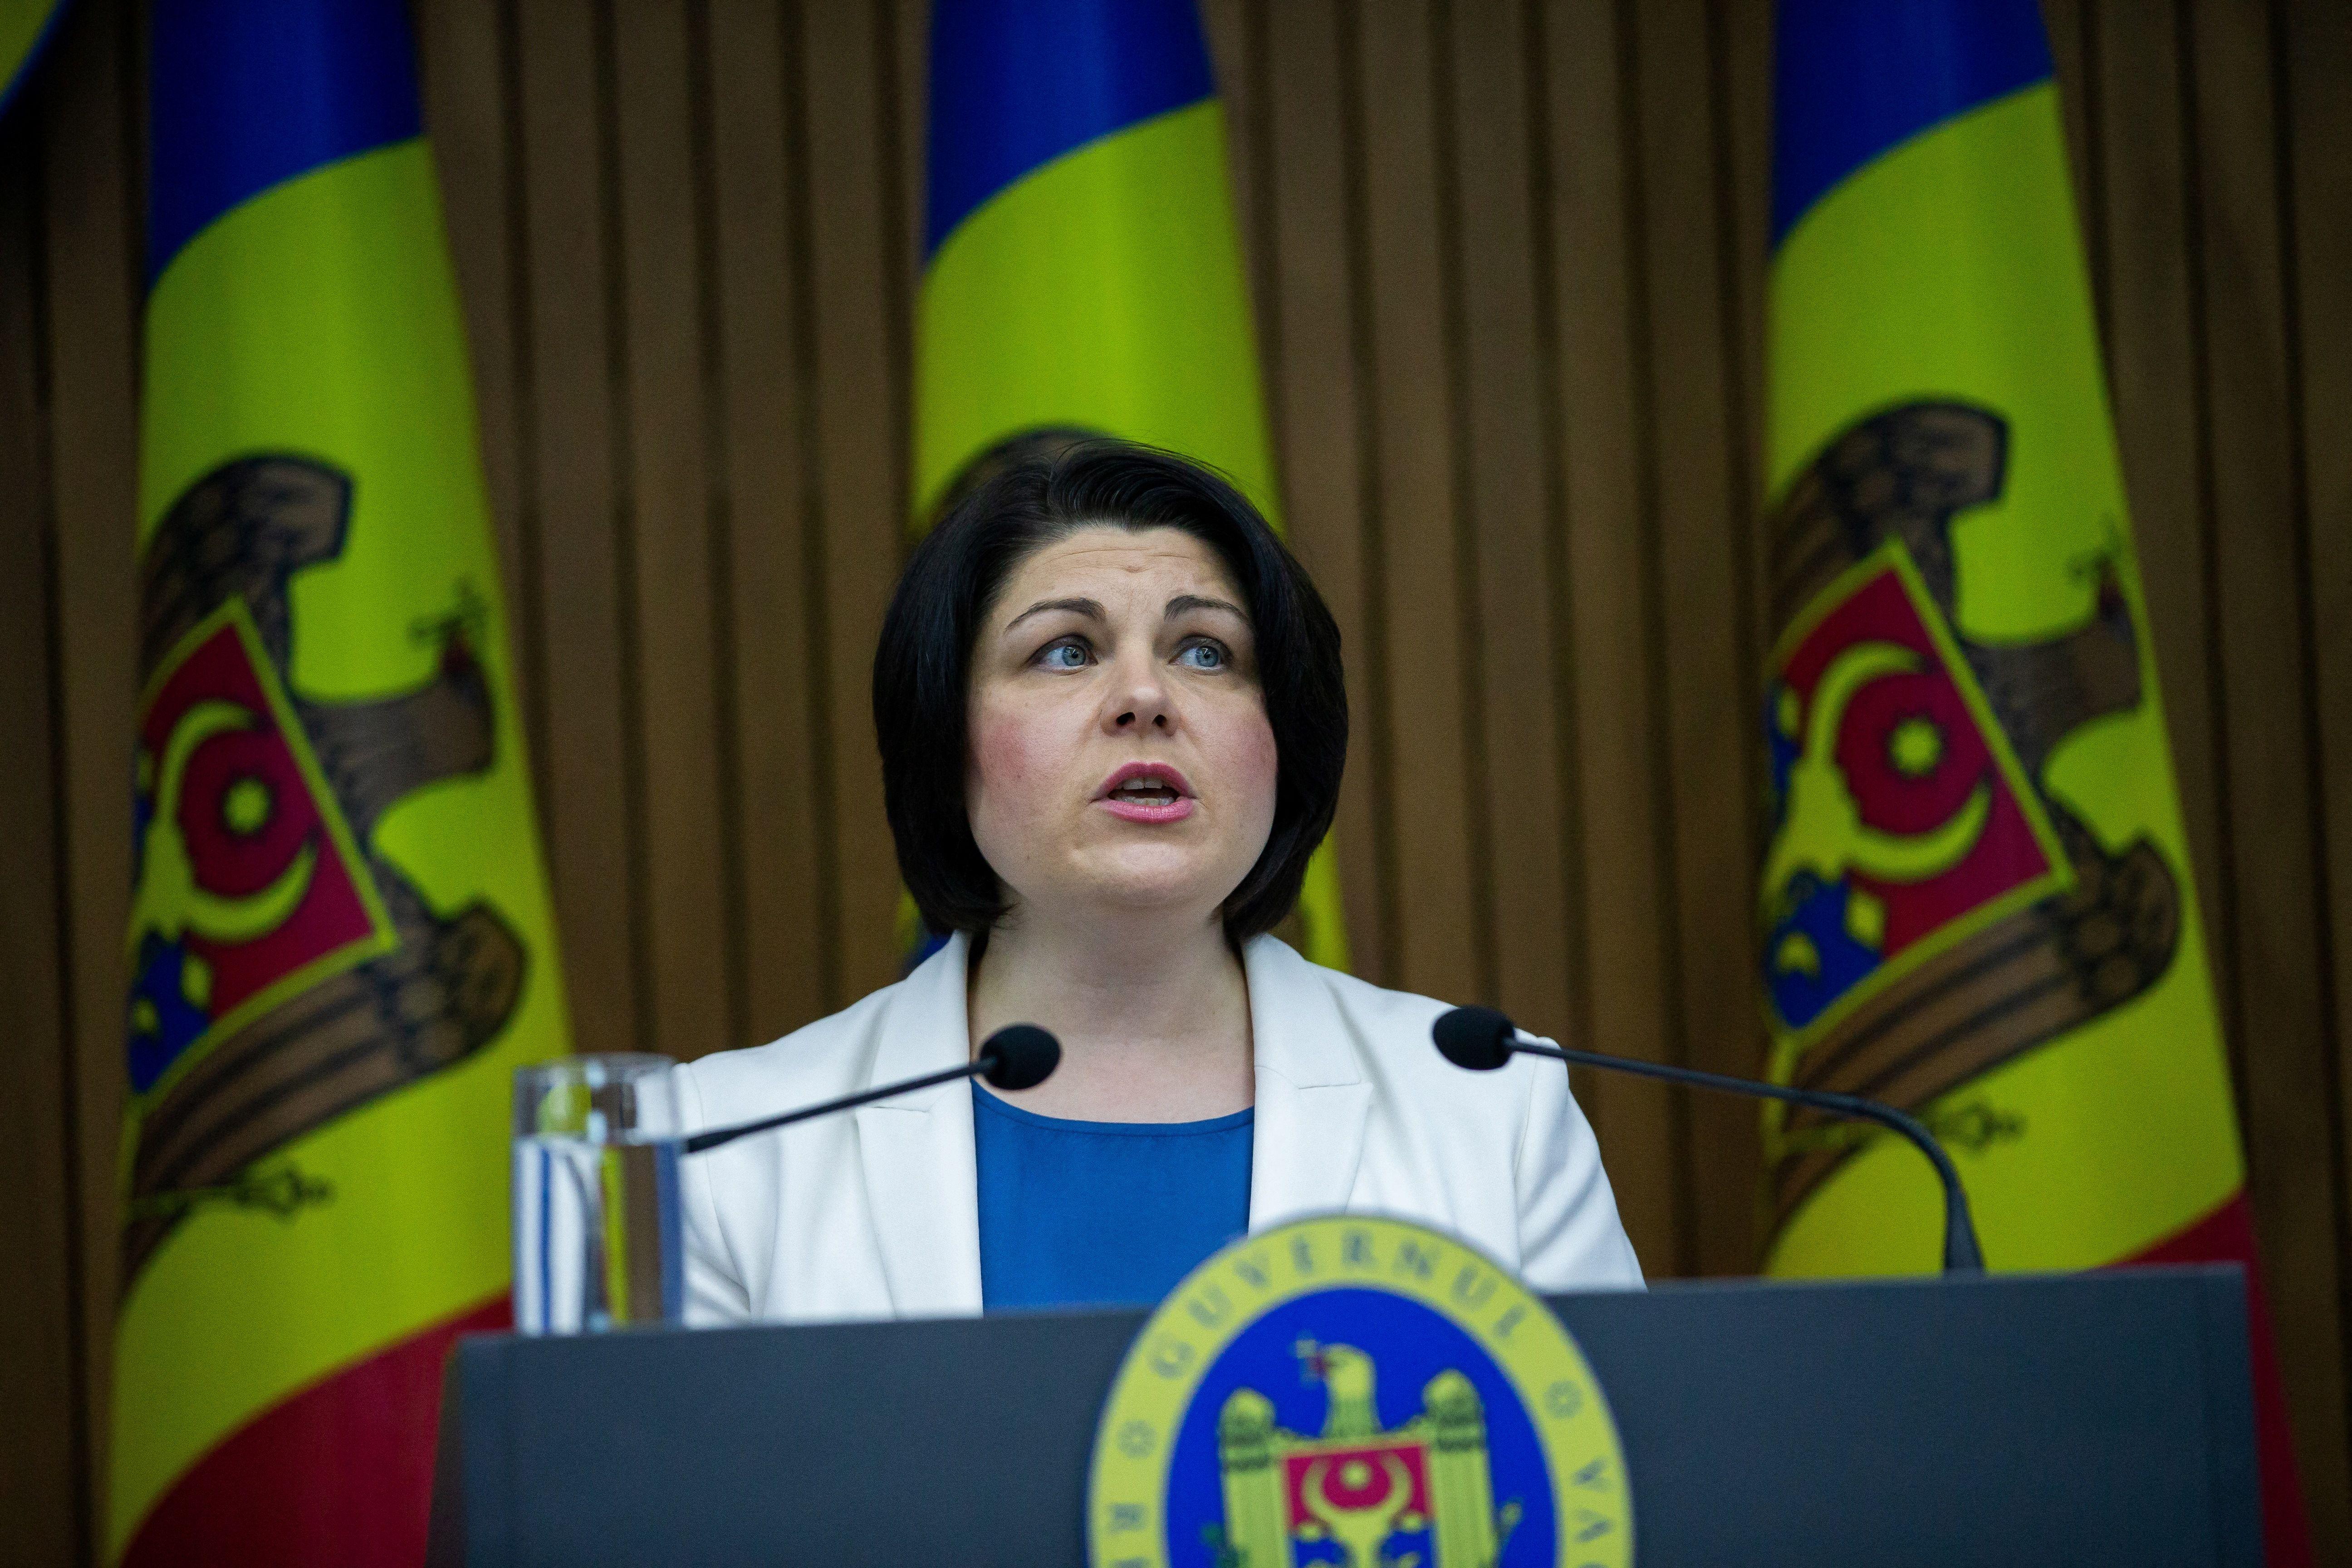 Natalia Gavrilita speaks at a lectern in front of three Moldovan flags.